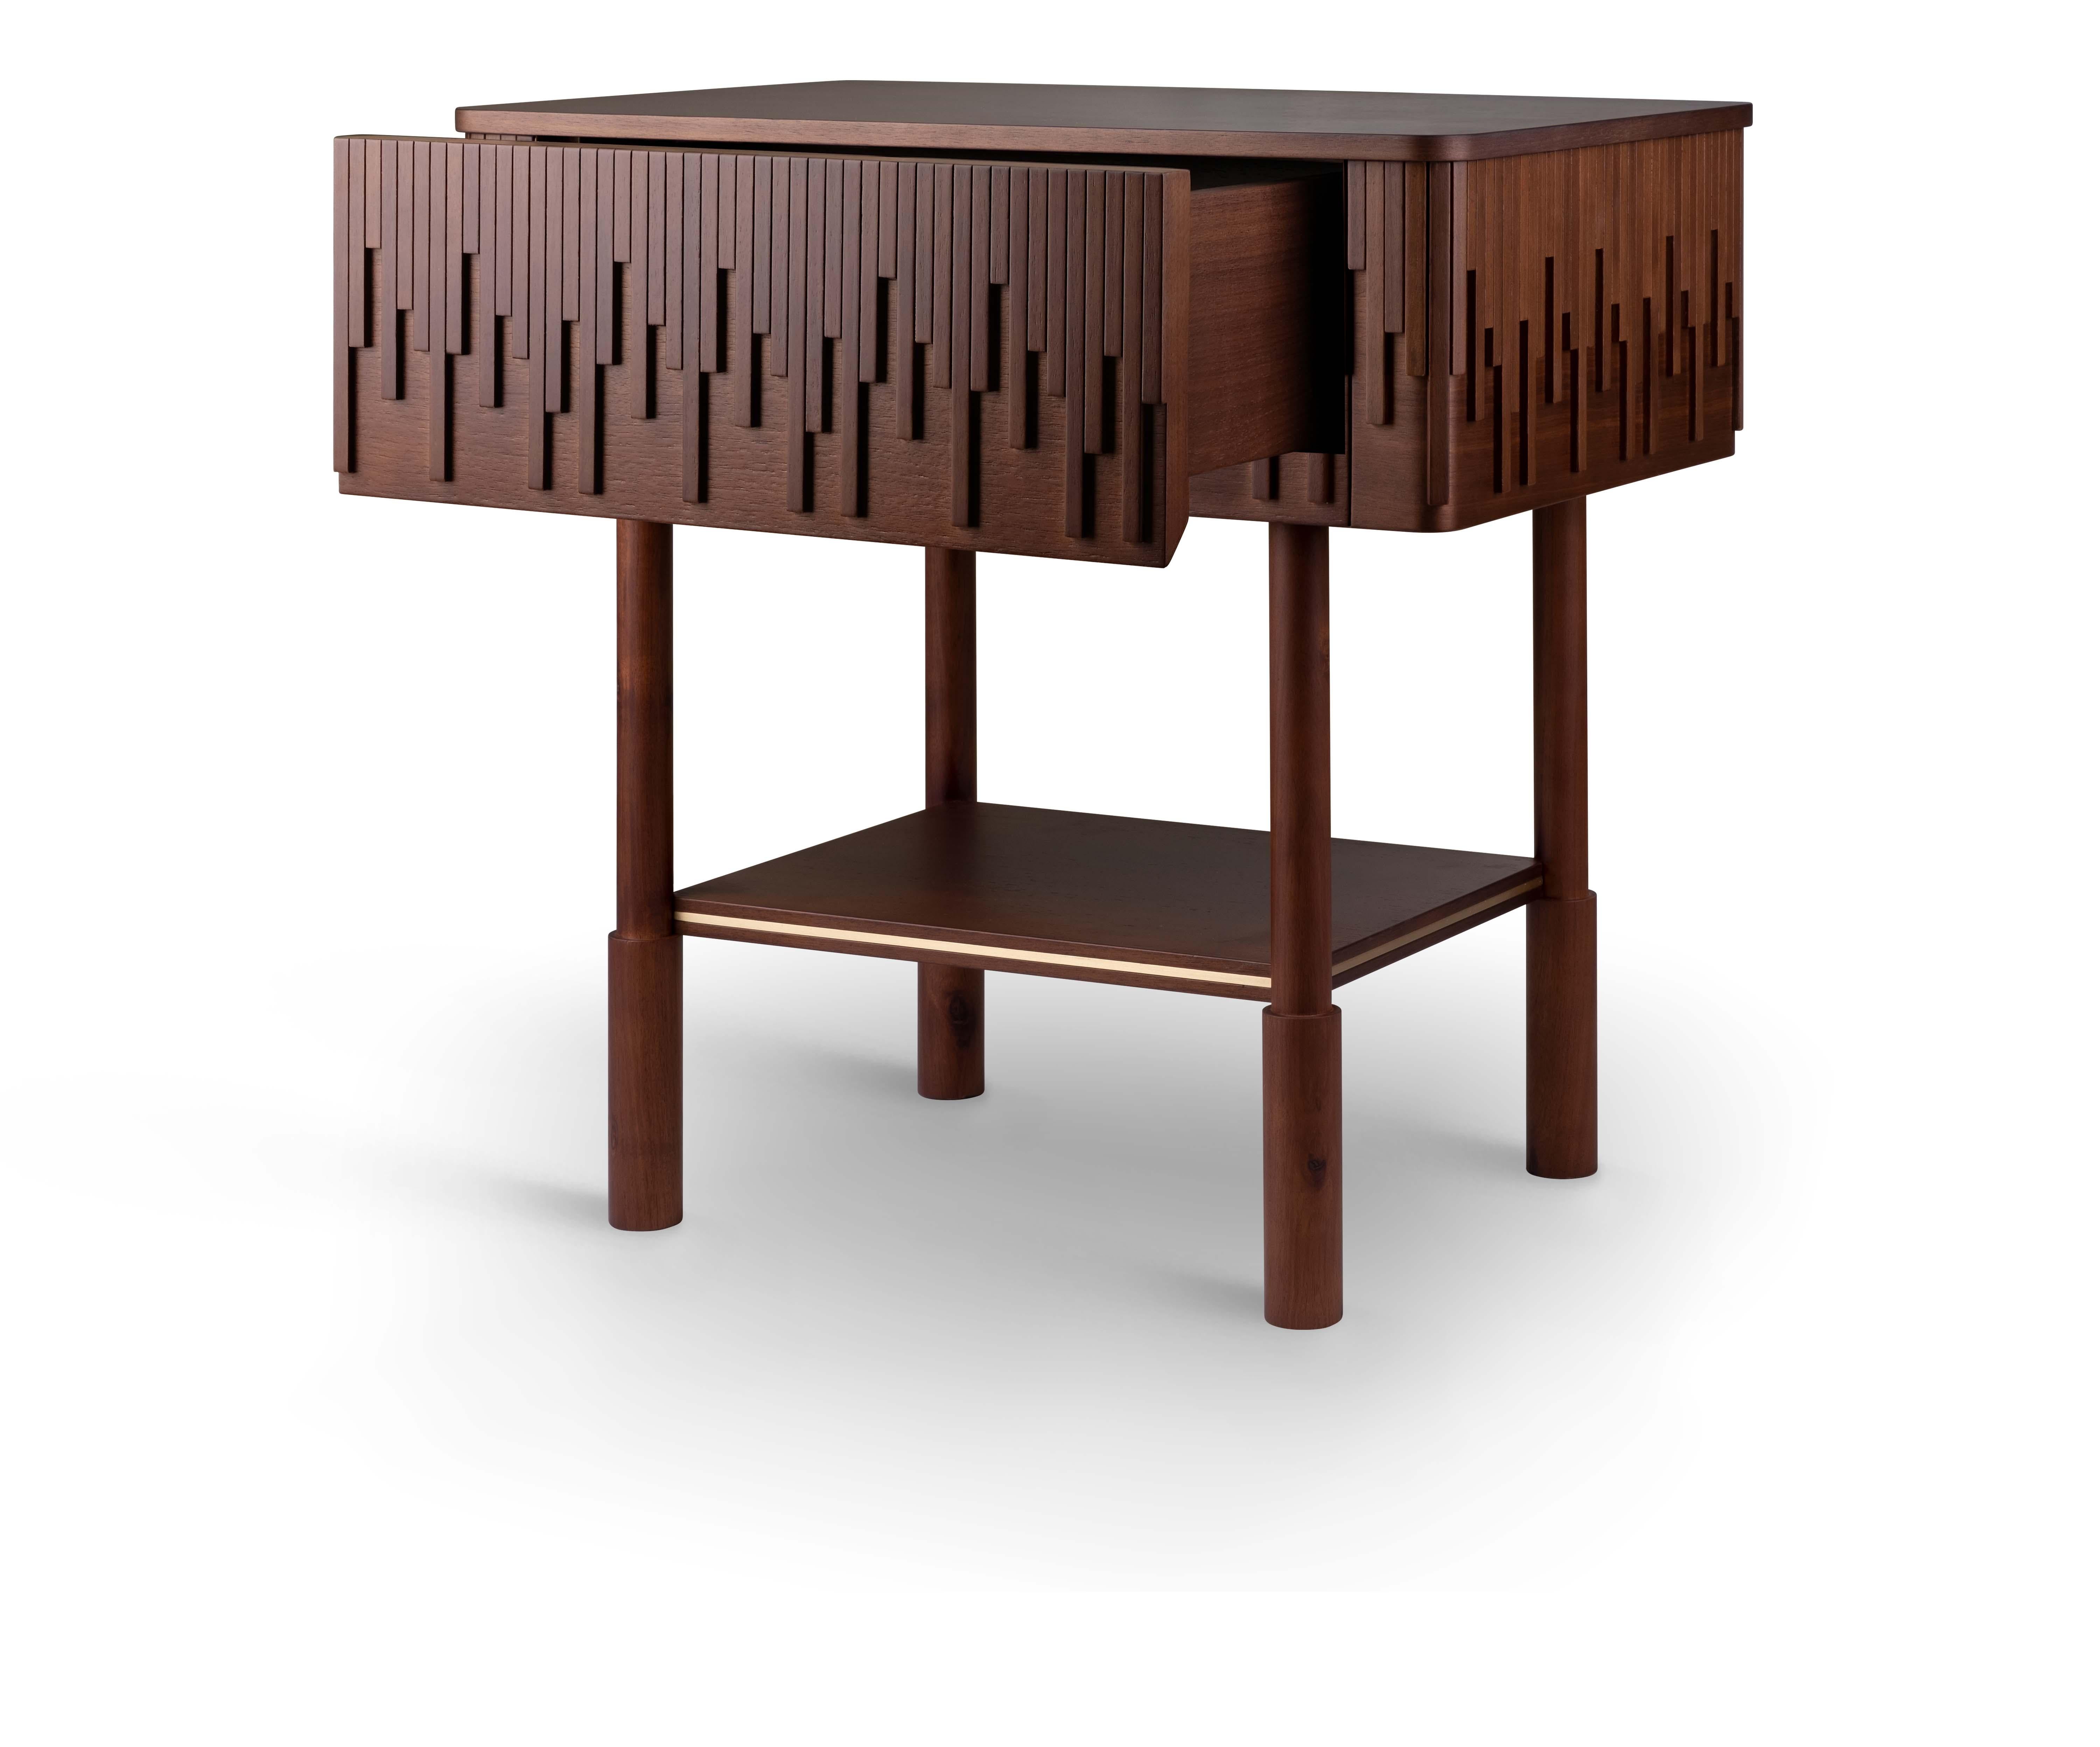 Portuguese 21st Century Walnut Wood Campbell Nightstand For Sale